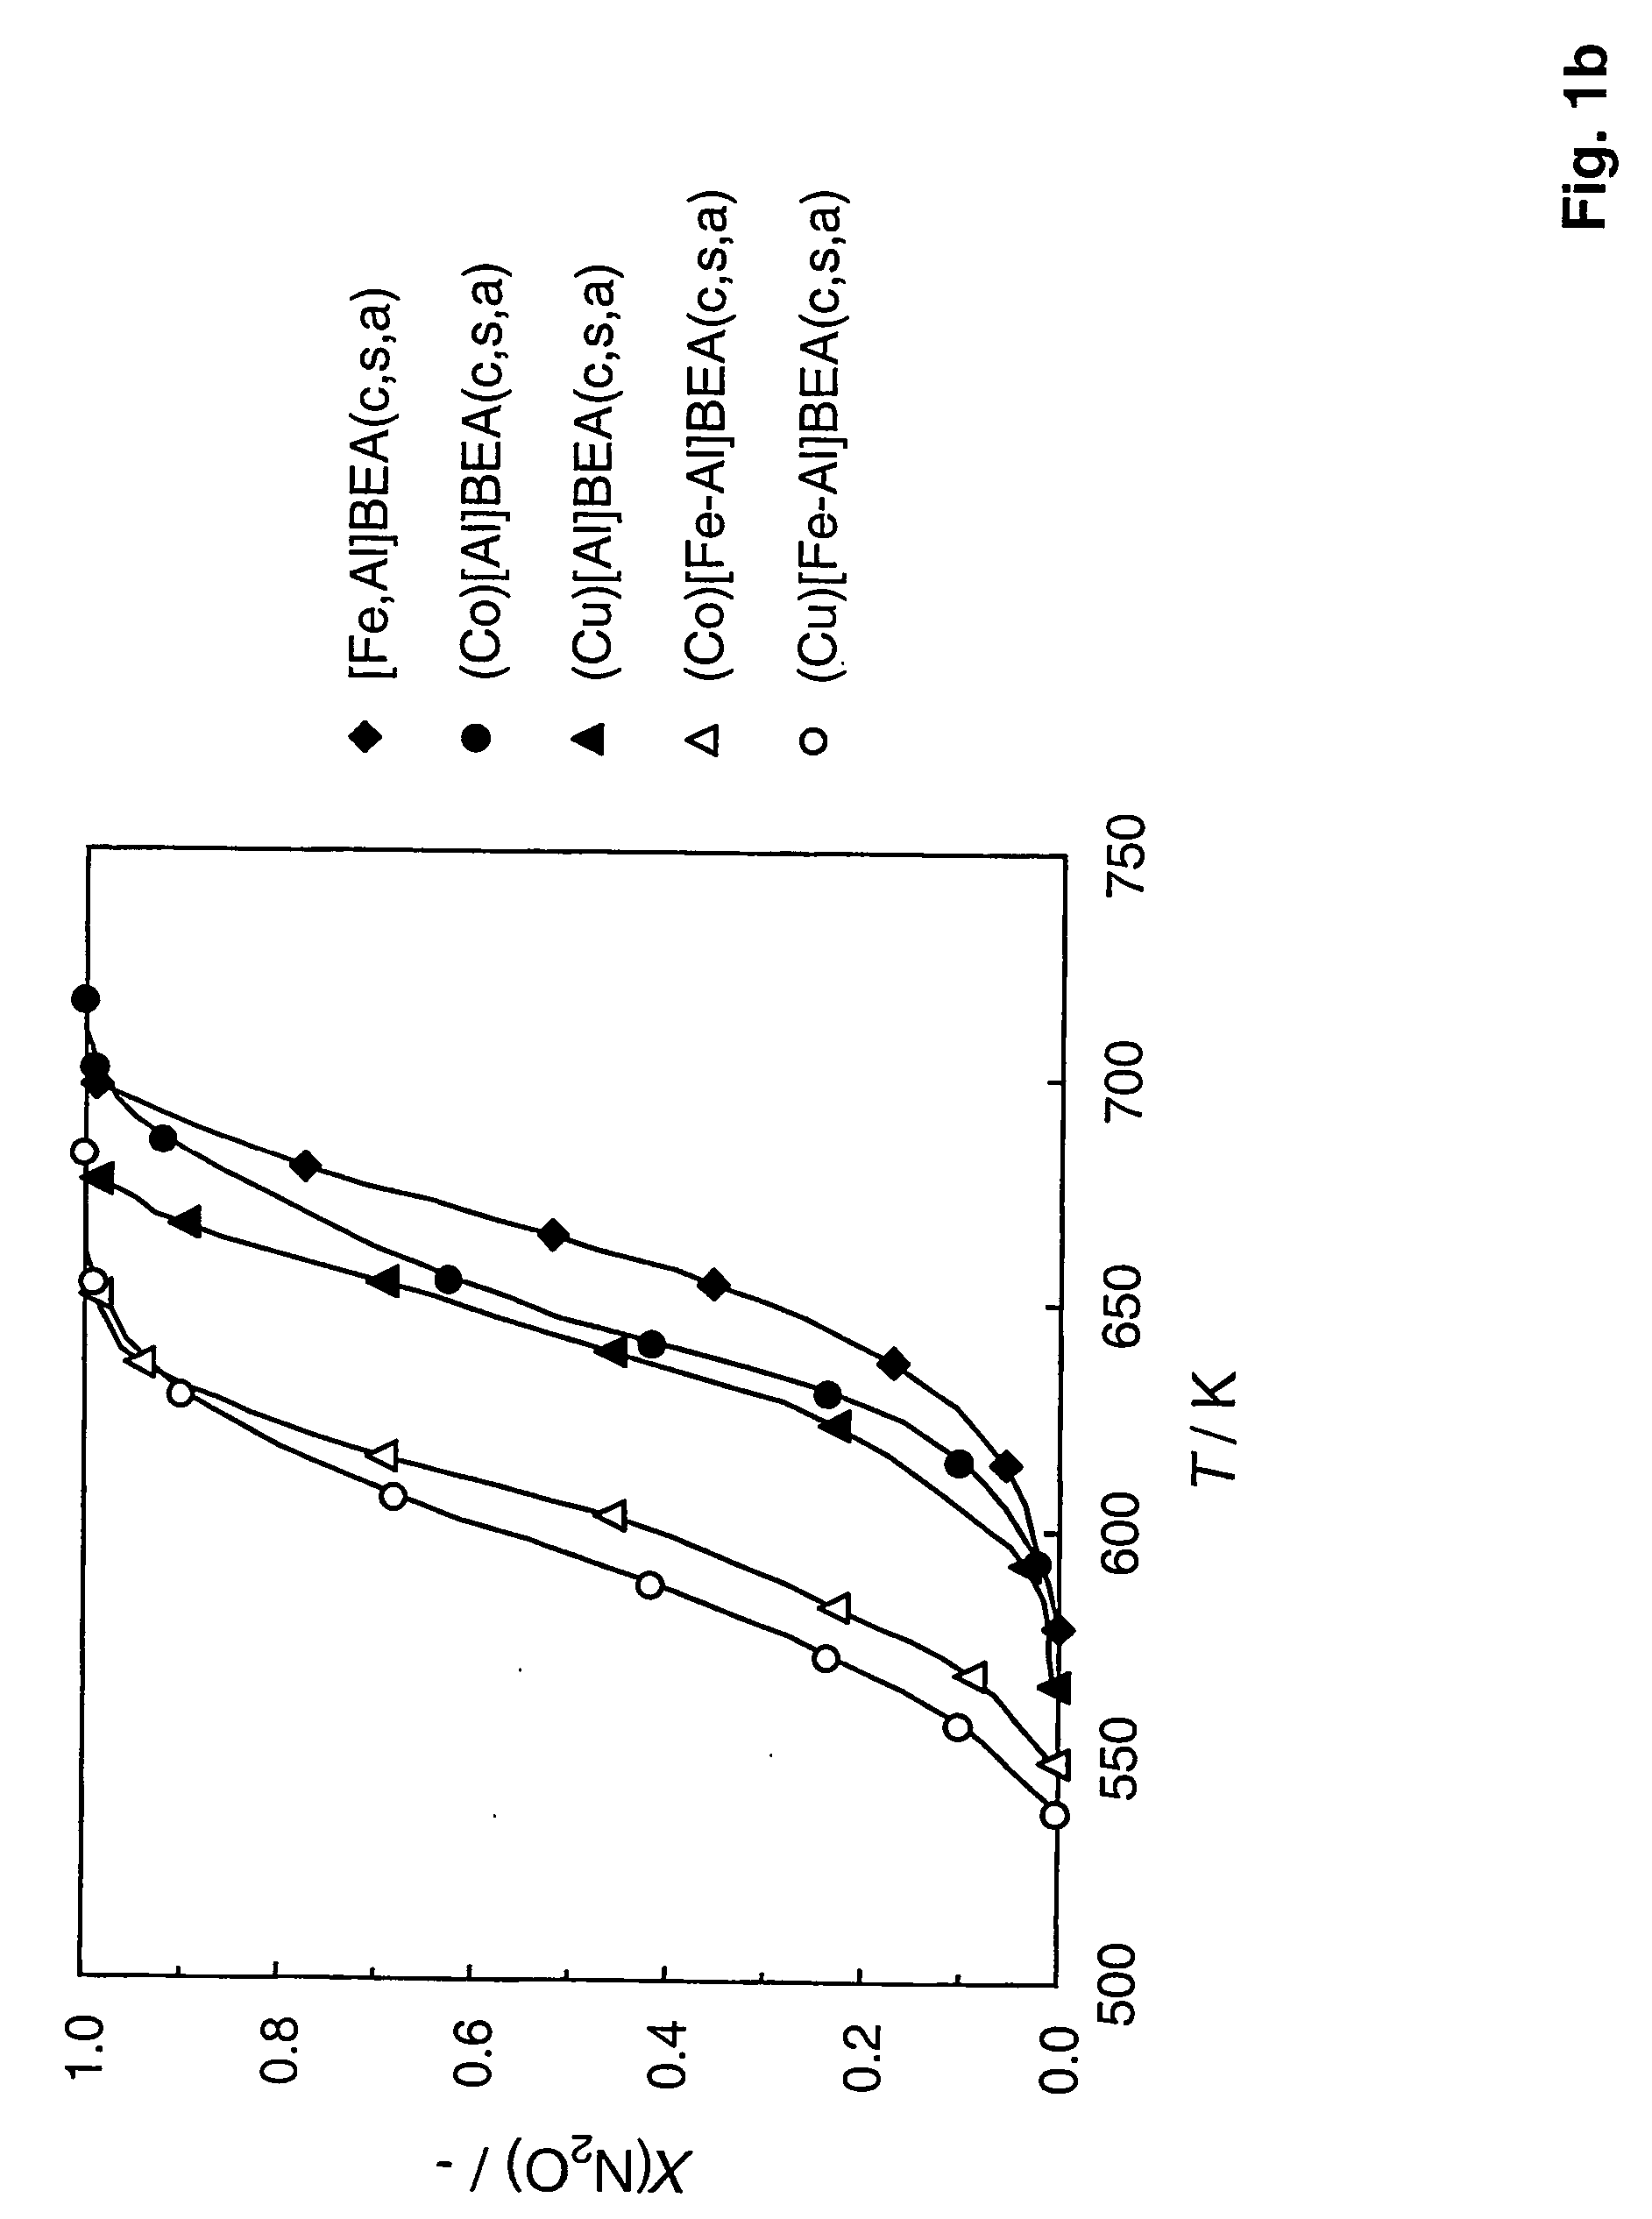 Method for preparation and activation of multimetallic zeolite catalysts, a catalyst composition and application for n2o abatement